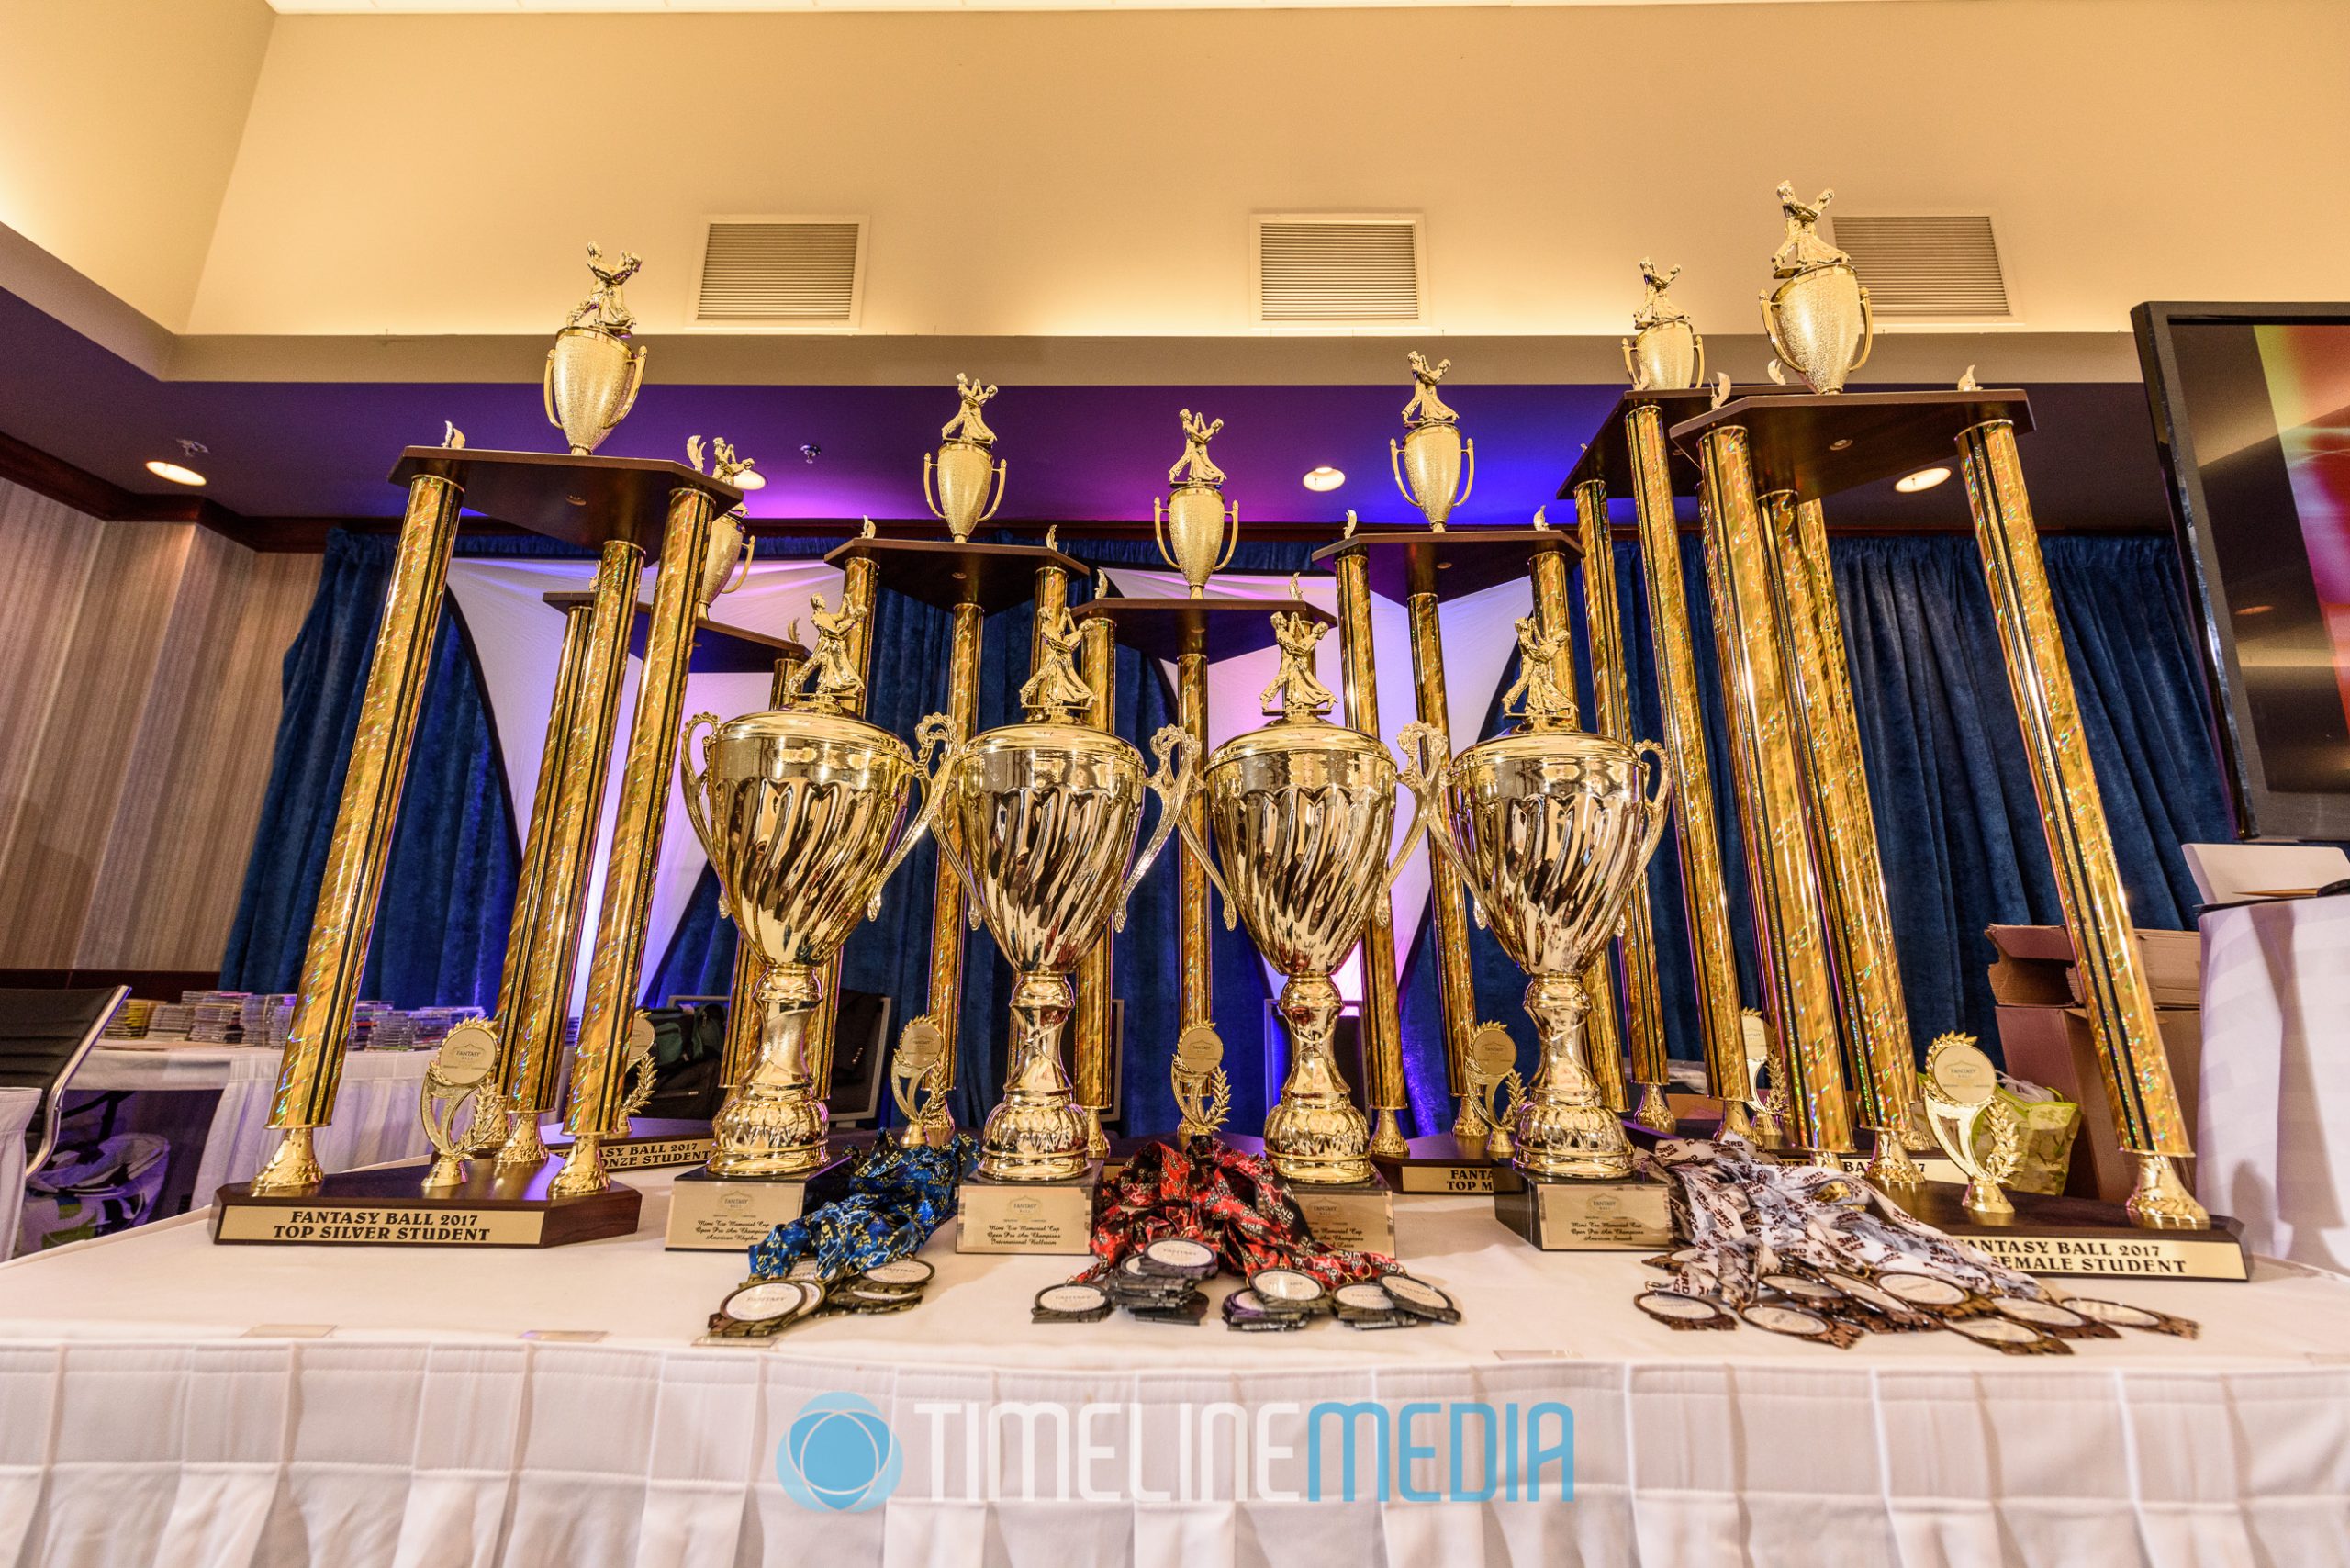 2017 Fantasy Ball Awards at the Fantasy Ball Dancesport Competition ©TimeLine Media